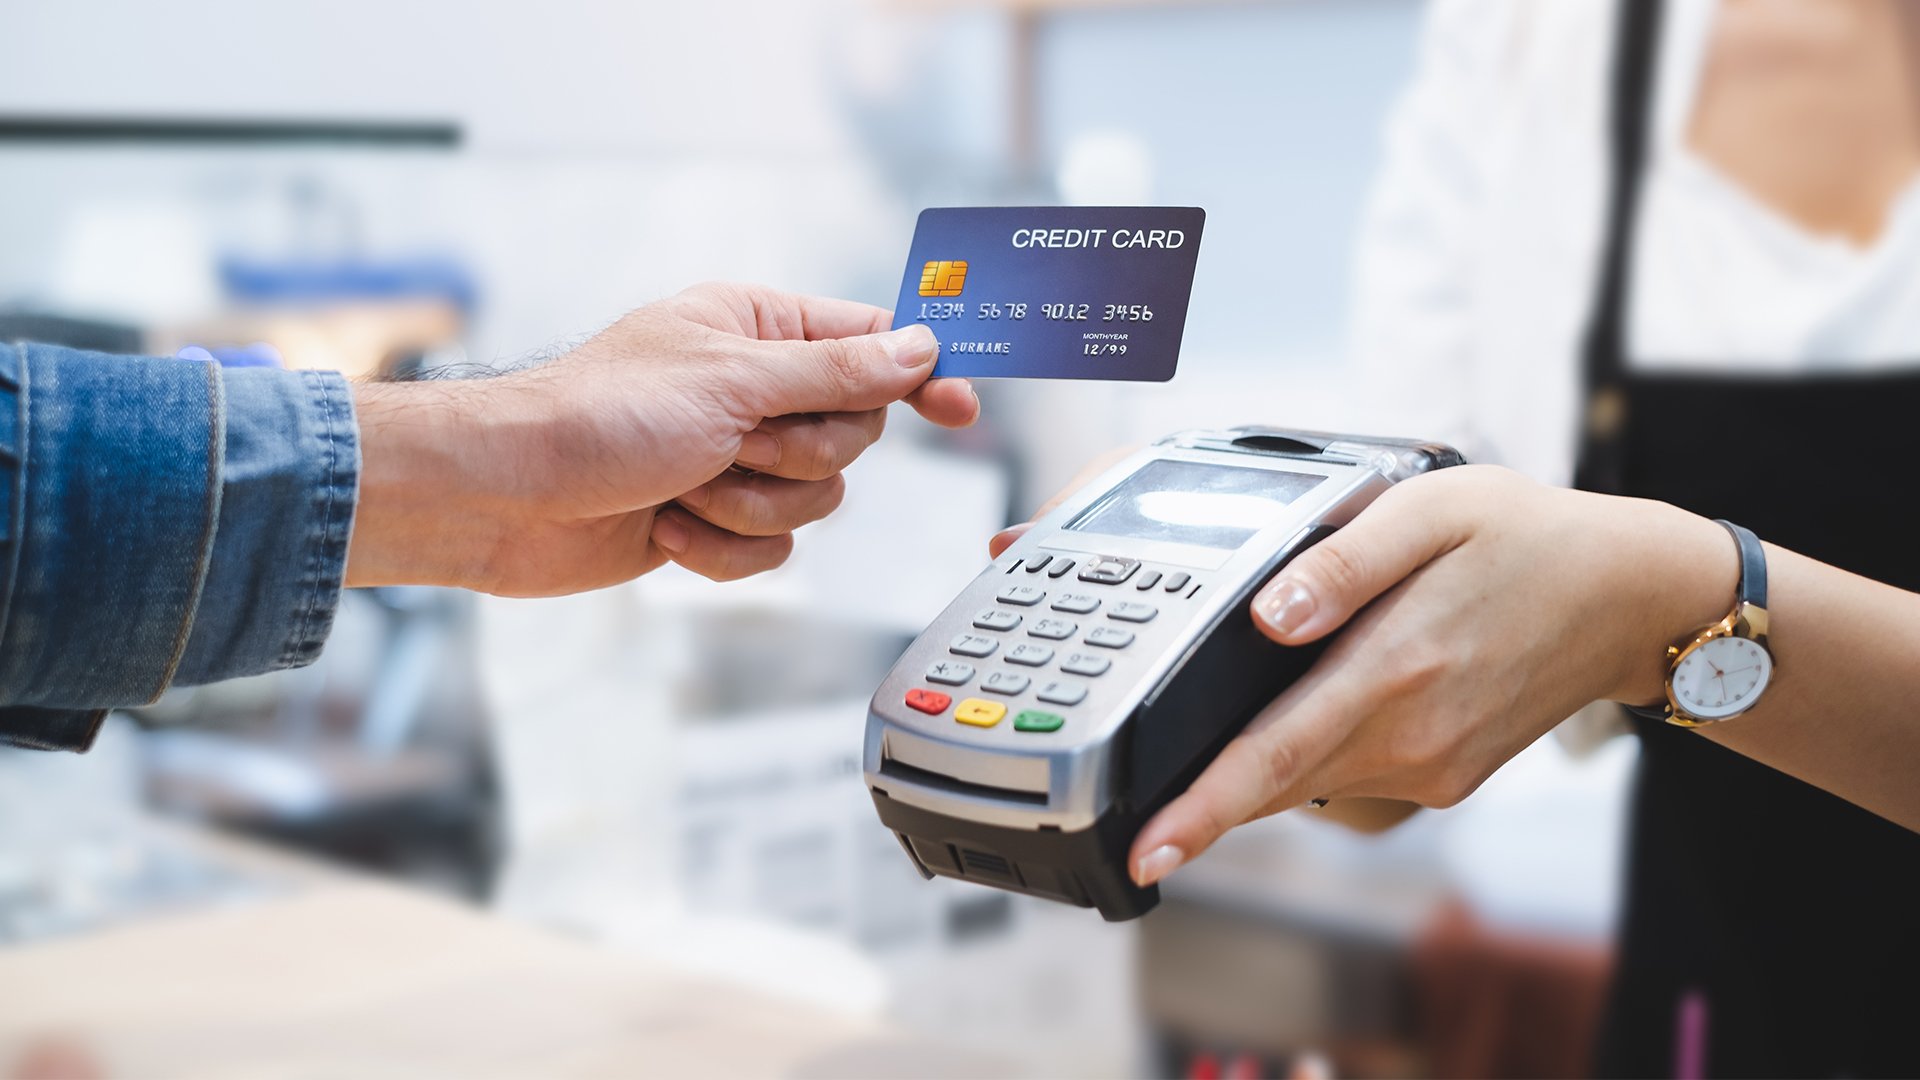 Credit Card Processing - A Detailed Guide